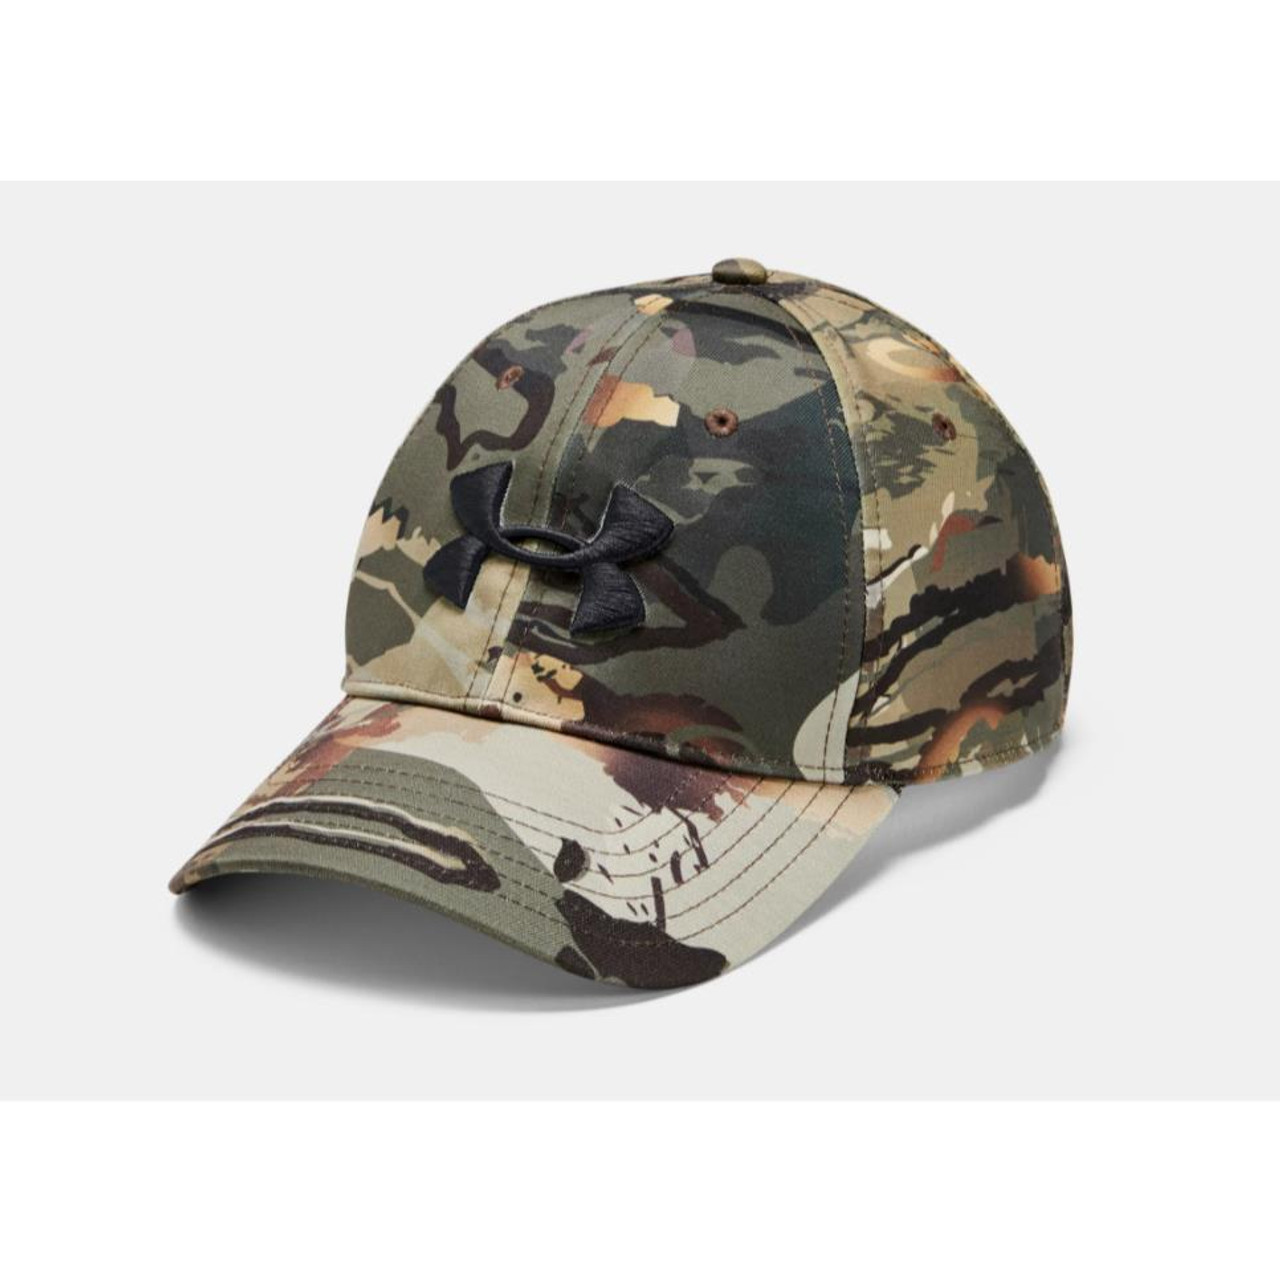 https://cdn11.bigcommerce.com/s-70mih4s/images/stencil/1280x1280/products/21143/55724/Under-Armour-Camo-2-0-Cap-Forest-2-0-Camo-Timber-194512471745_image1__56456.1632518063.jpg?c=2